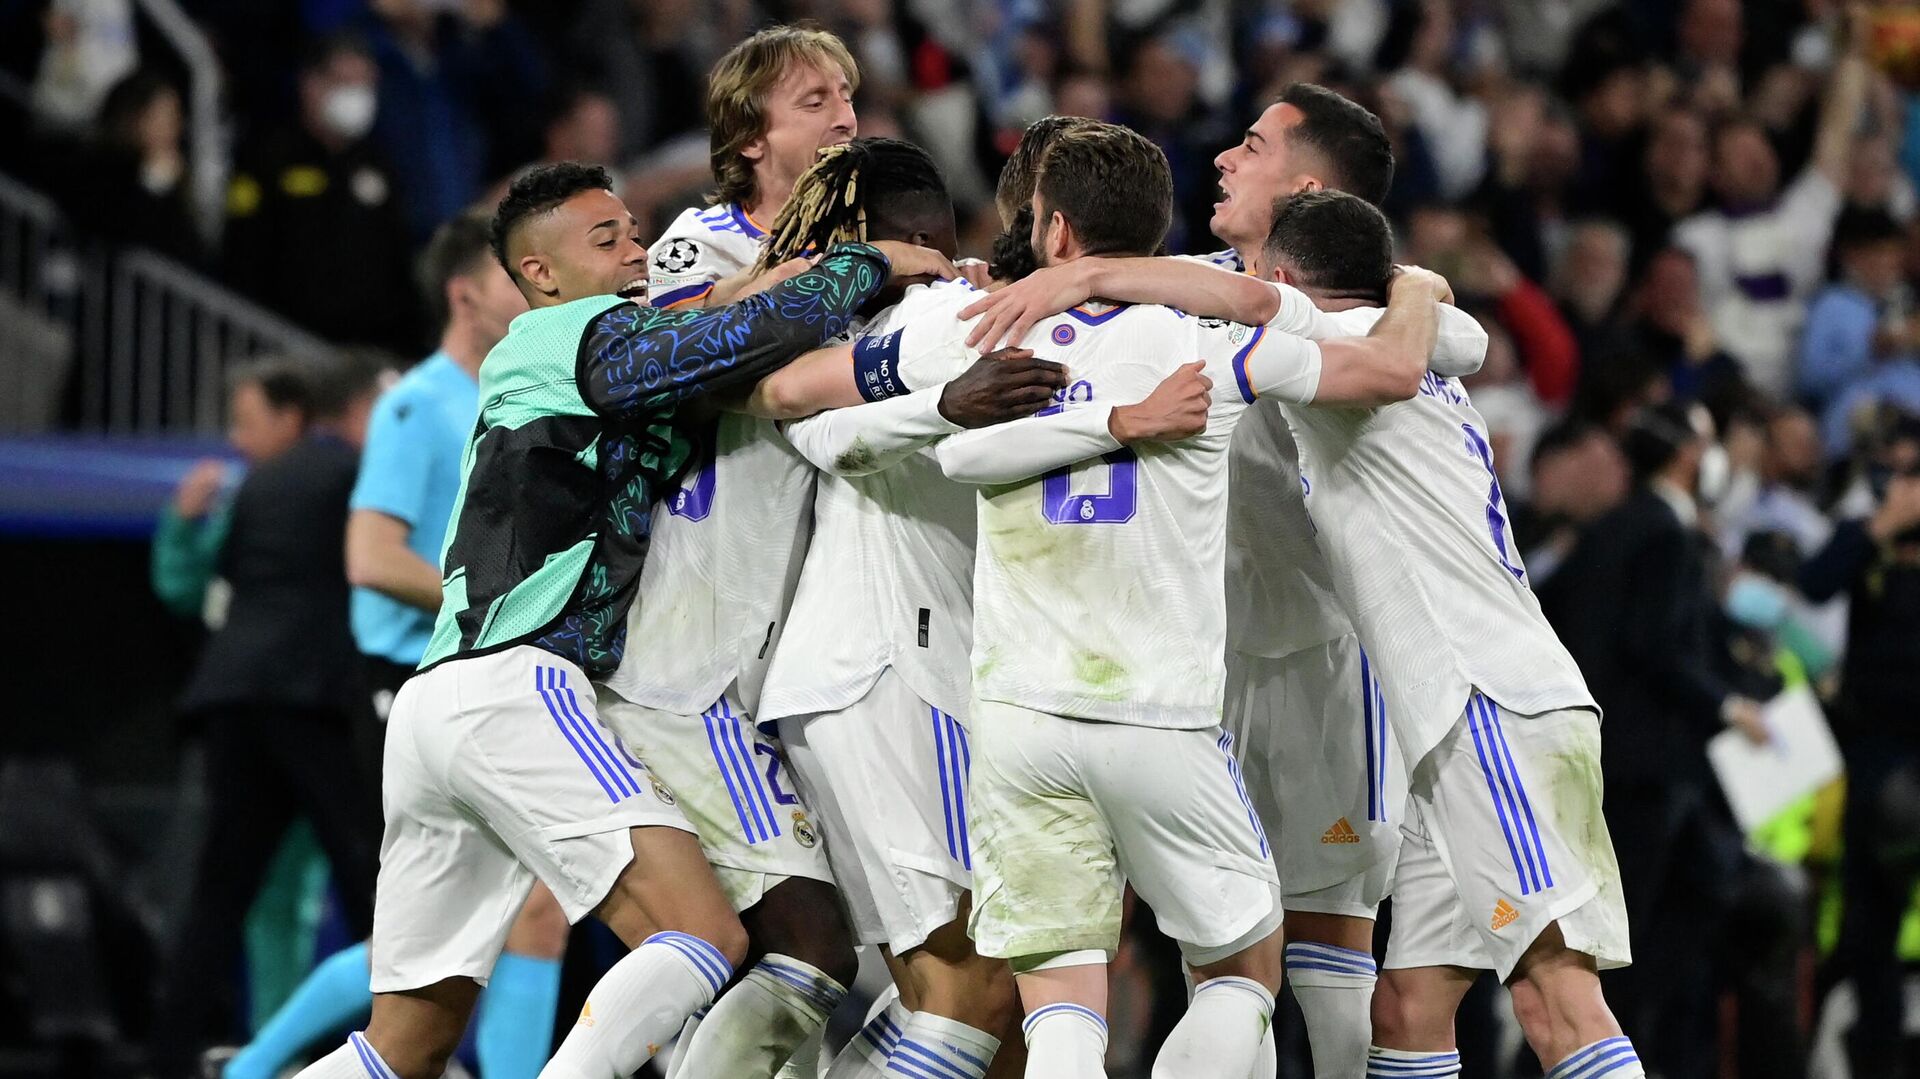 Real Madrid's players celebrate after winning the UEFA Champions League semi-final second leg football match between Real Madrid CF and Manchester City at the Santiago Bernabeu stadium in Madrid on May 4, 2022. - Sputnik International, 1920, 04.05.2022